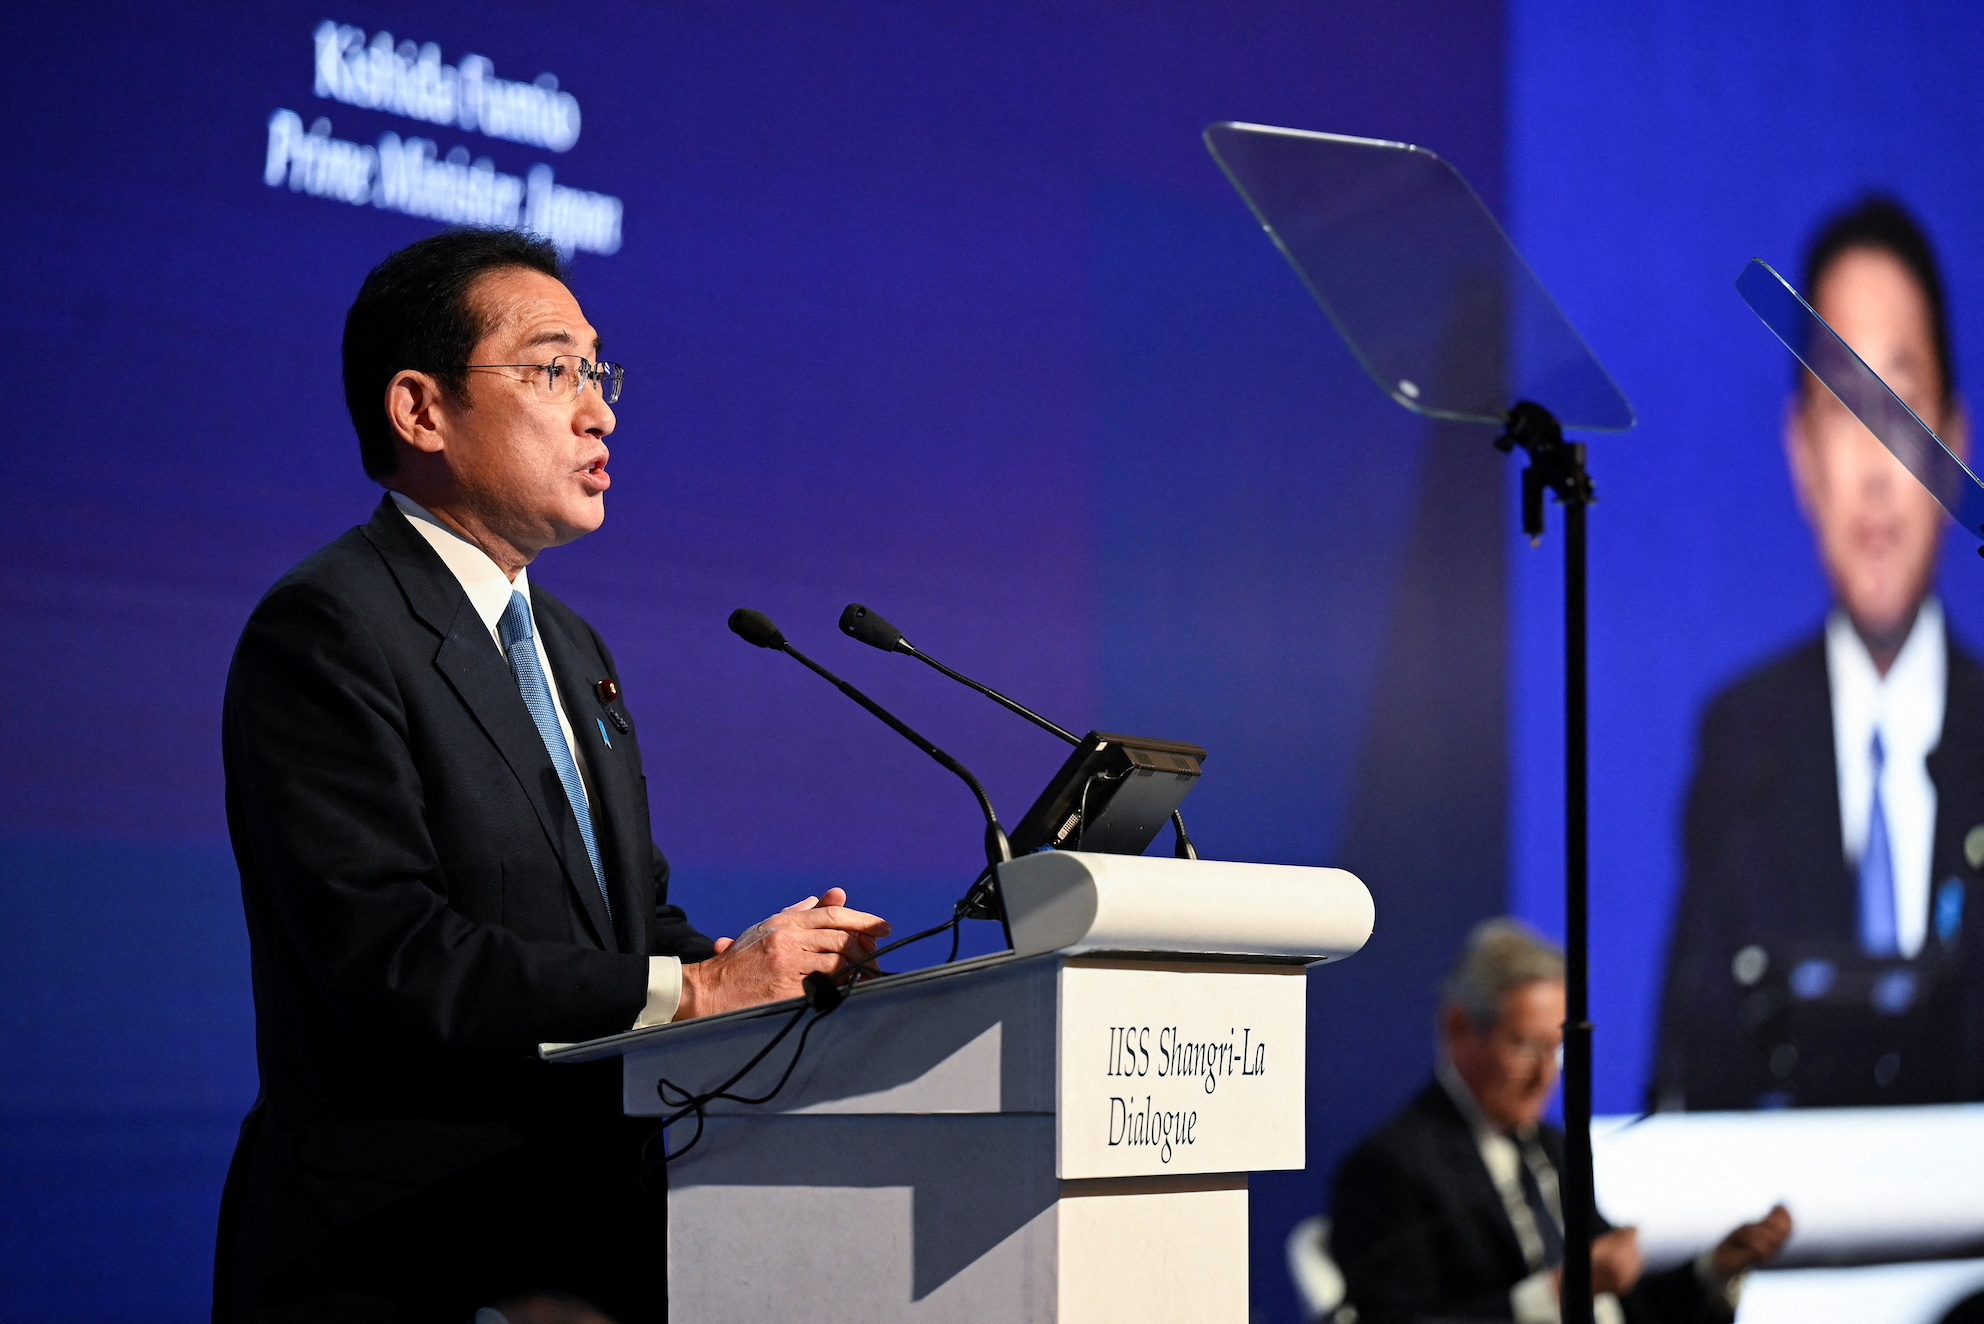 At Asia security summit, Japan vows to boost regional security role